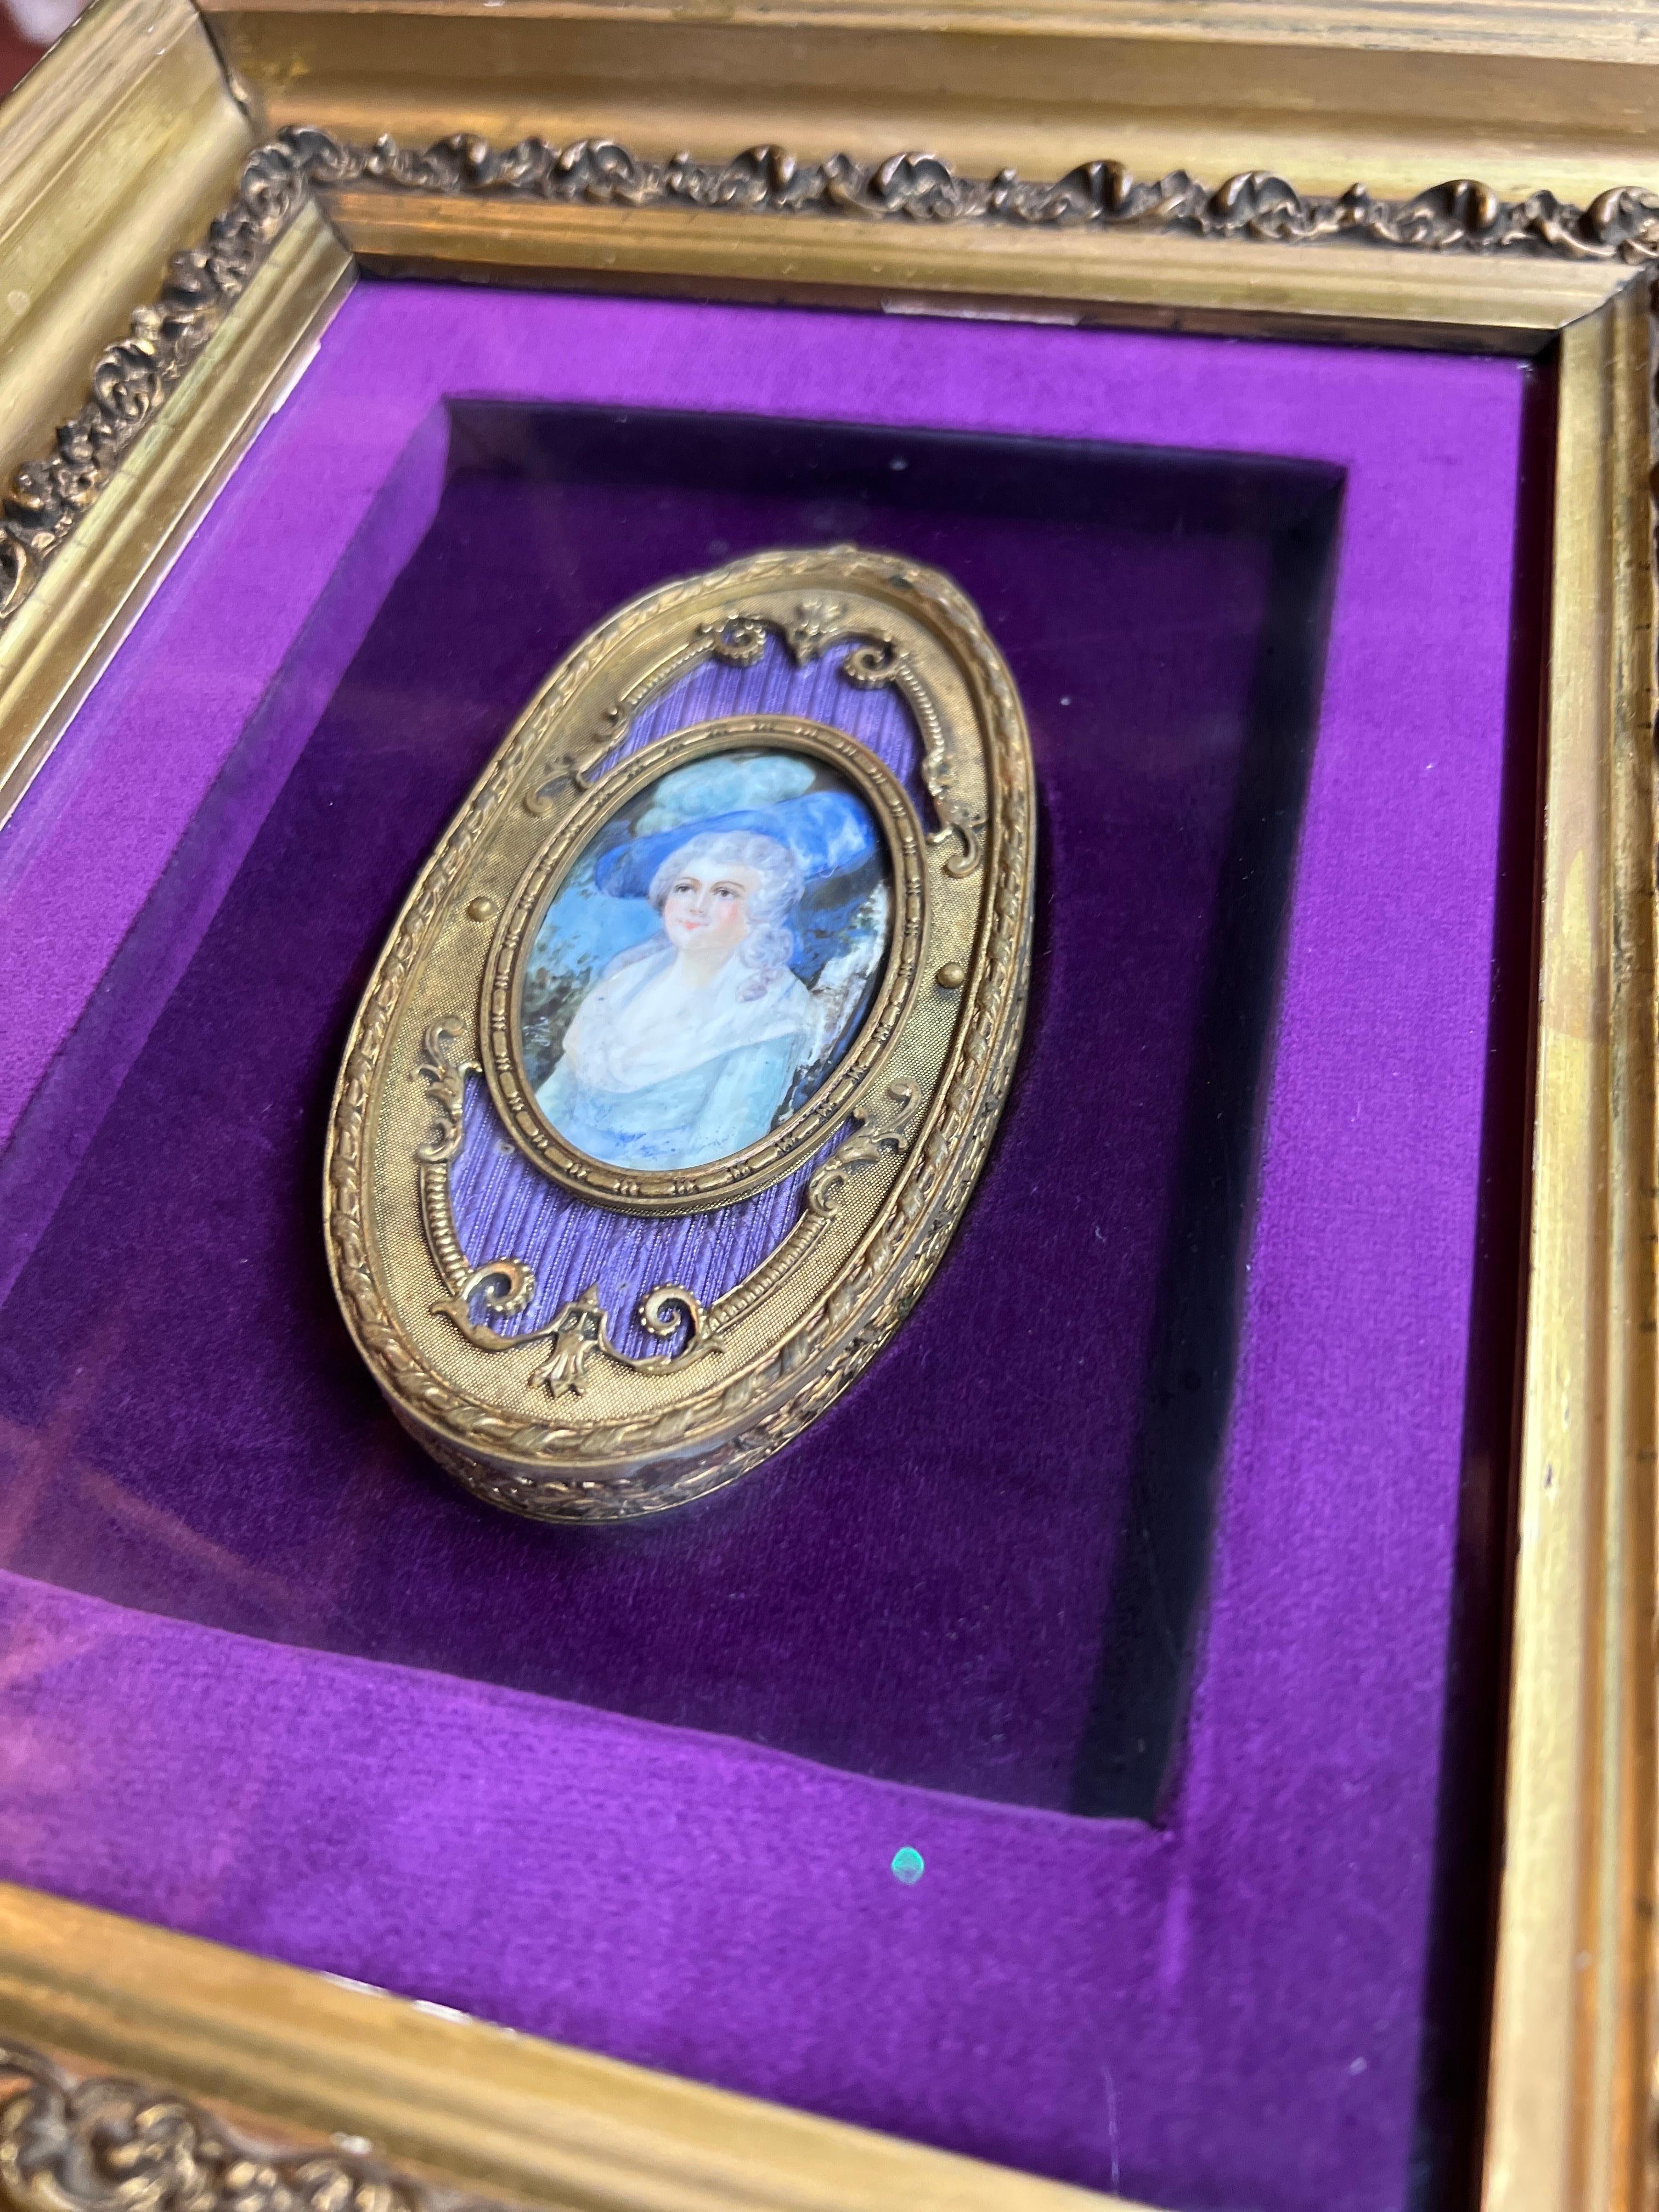 France, circa 1900. 

An antique French school painting of a noble women on likely paper or animal bone. The painting is housed inside a bronze d'ore frame and accented by purple enamel and Neoclassical accents. The entire piece is set on a velvet